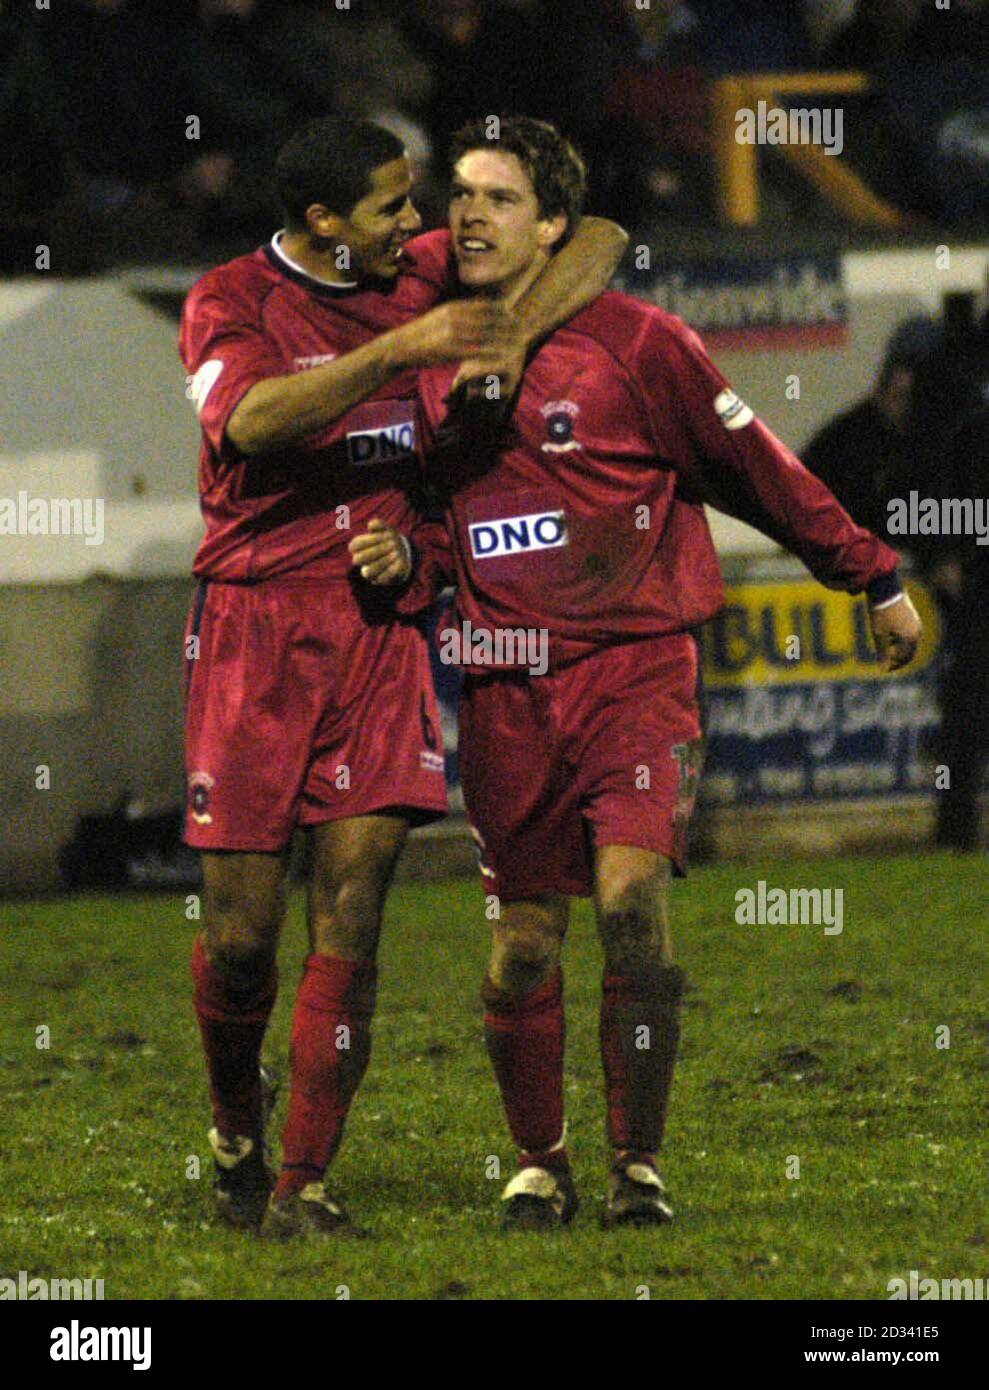 Hartlepool's Darrel Clarke (right) is congratulated by team-mate Chris Westwood after scoring the winning goal against Boston United during their Nationwide Division Three match at Boston United's York Street Stadium. Hartlepool defeated Boston United 1-0.  THIS PICTURE CAN ONLY BE USED WITHIN THE CONTEXT OF AN EDITORIAL FEATURE. NO UNOFFICIAL CLUB WEBSITE USE. Stock Photo